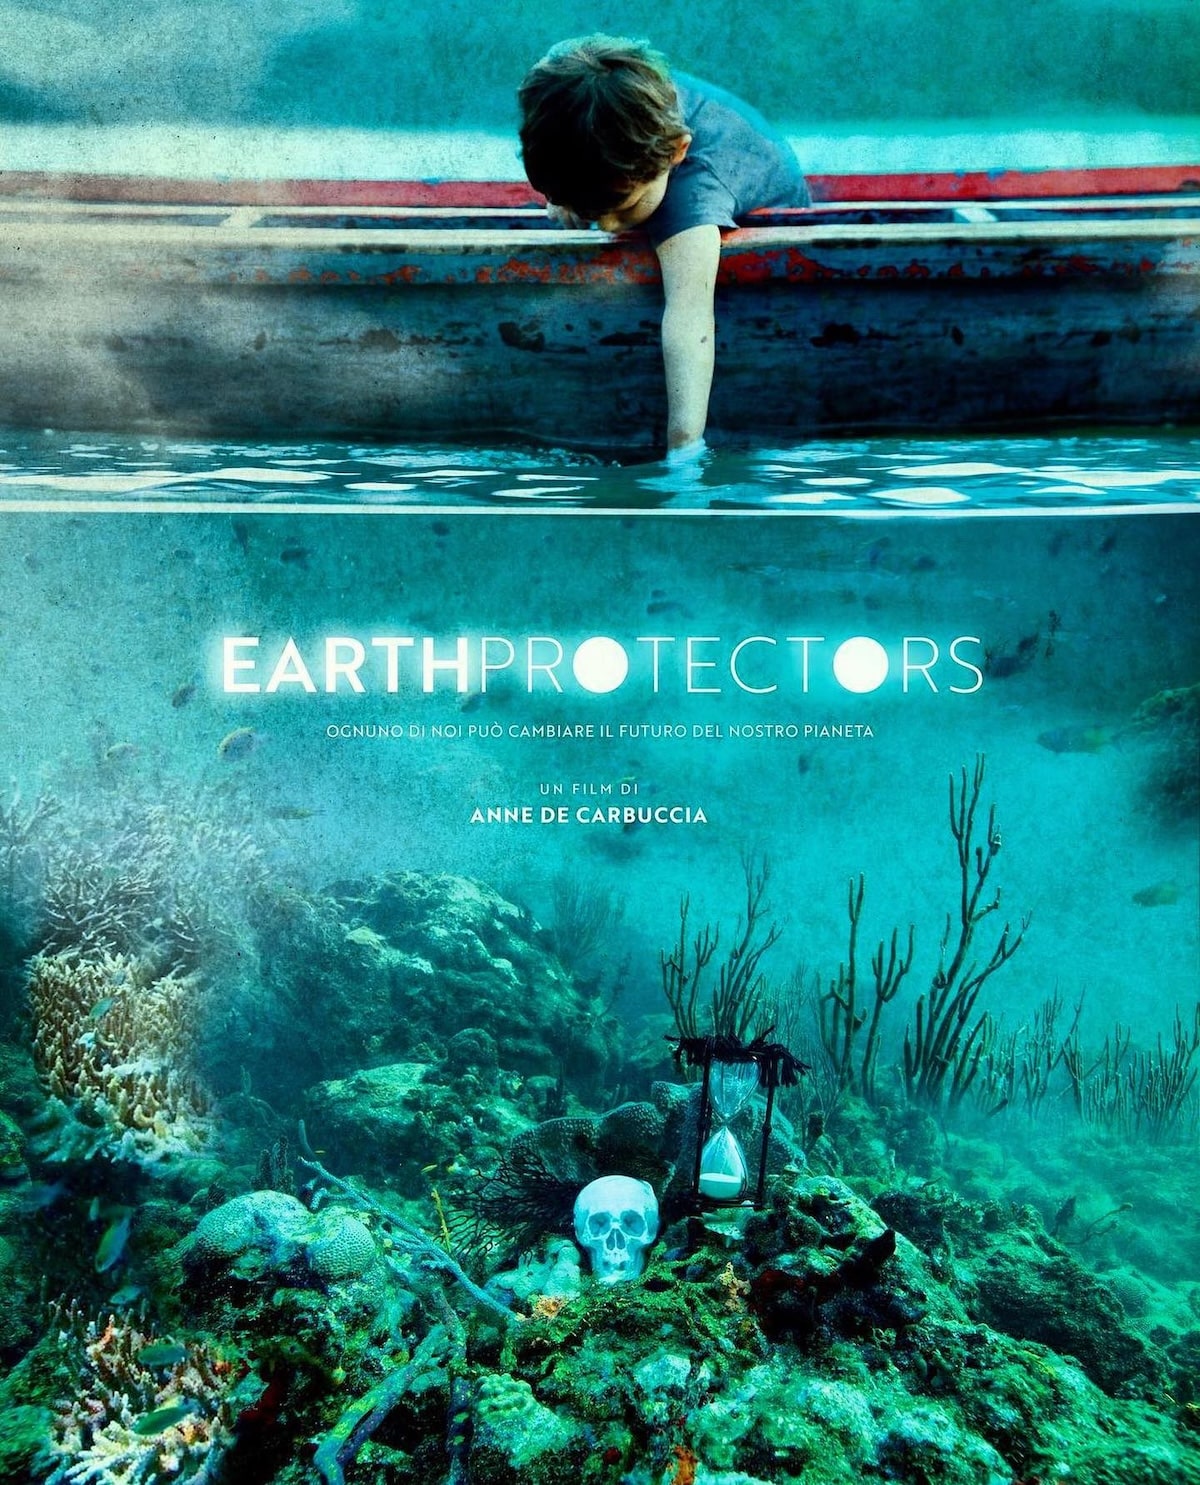 The poster for the film Earth Protectors